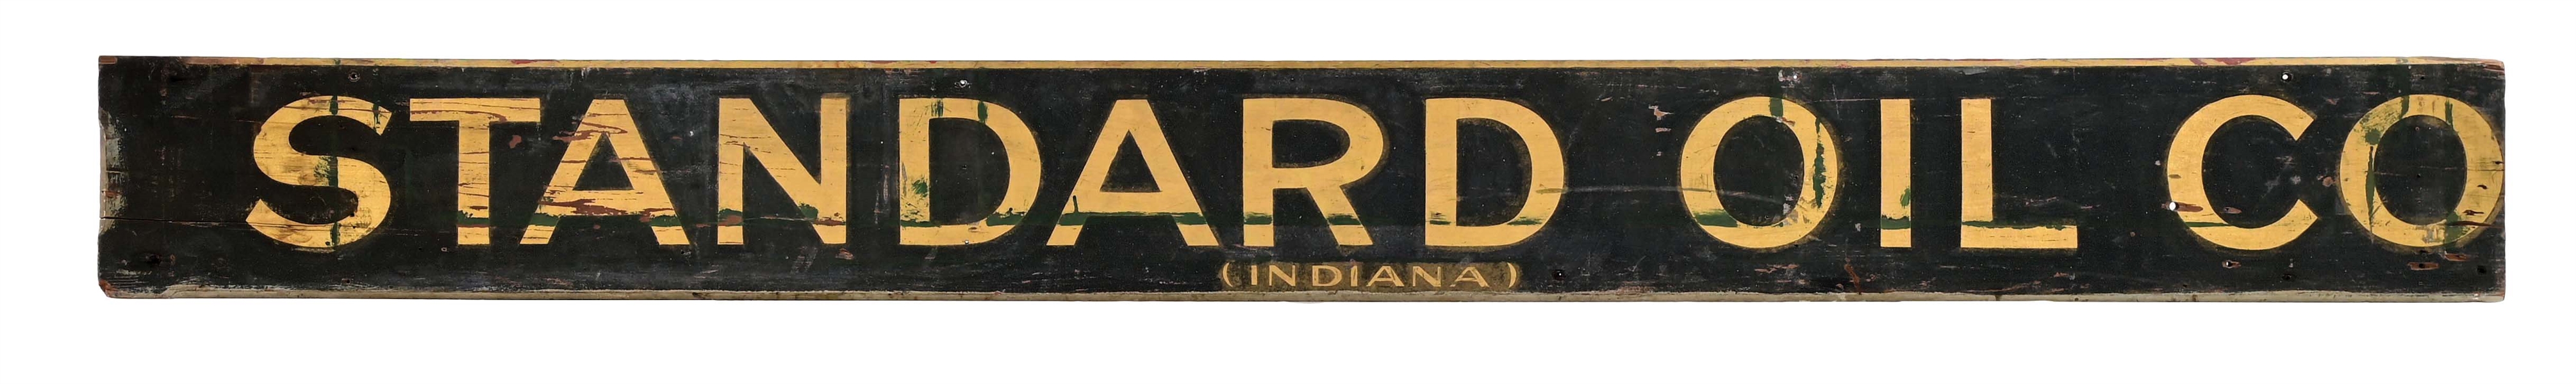 STANDARD OIL CO. OF INDIANA SAND PAINTED WOODEN SIGN.